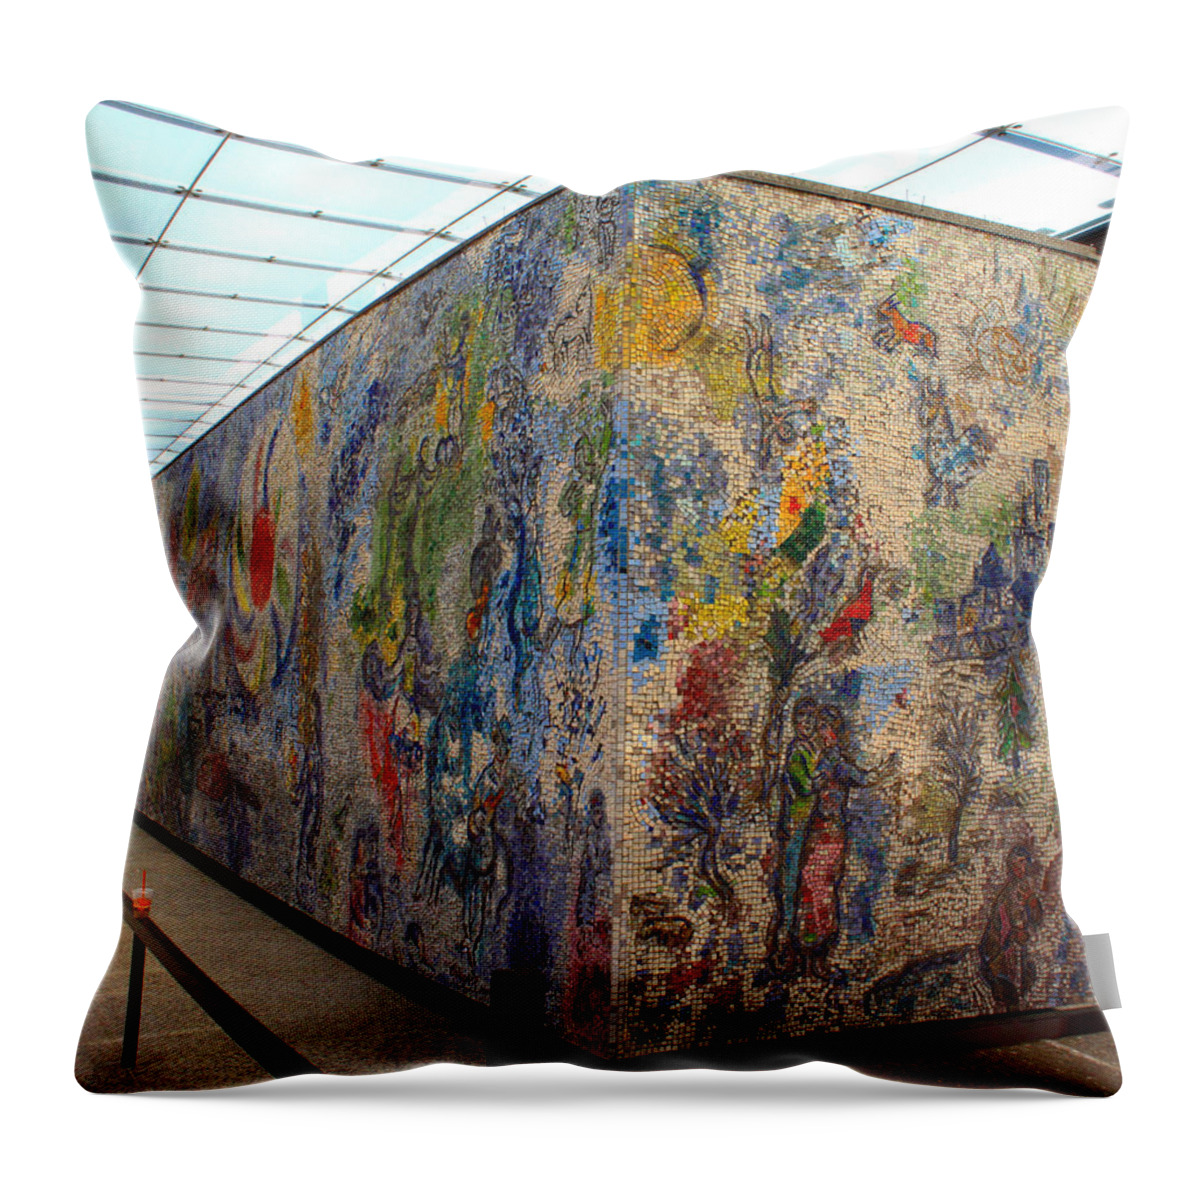 Chicago Throw Pillow featuring the photograph Chicago Chagall Mosaic by Paul Anderson